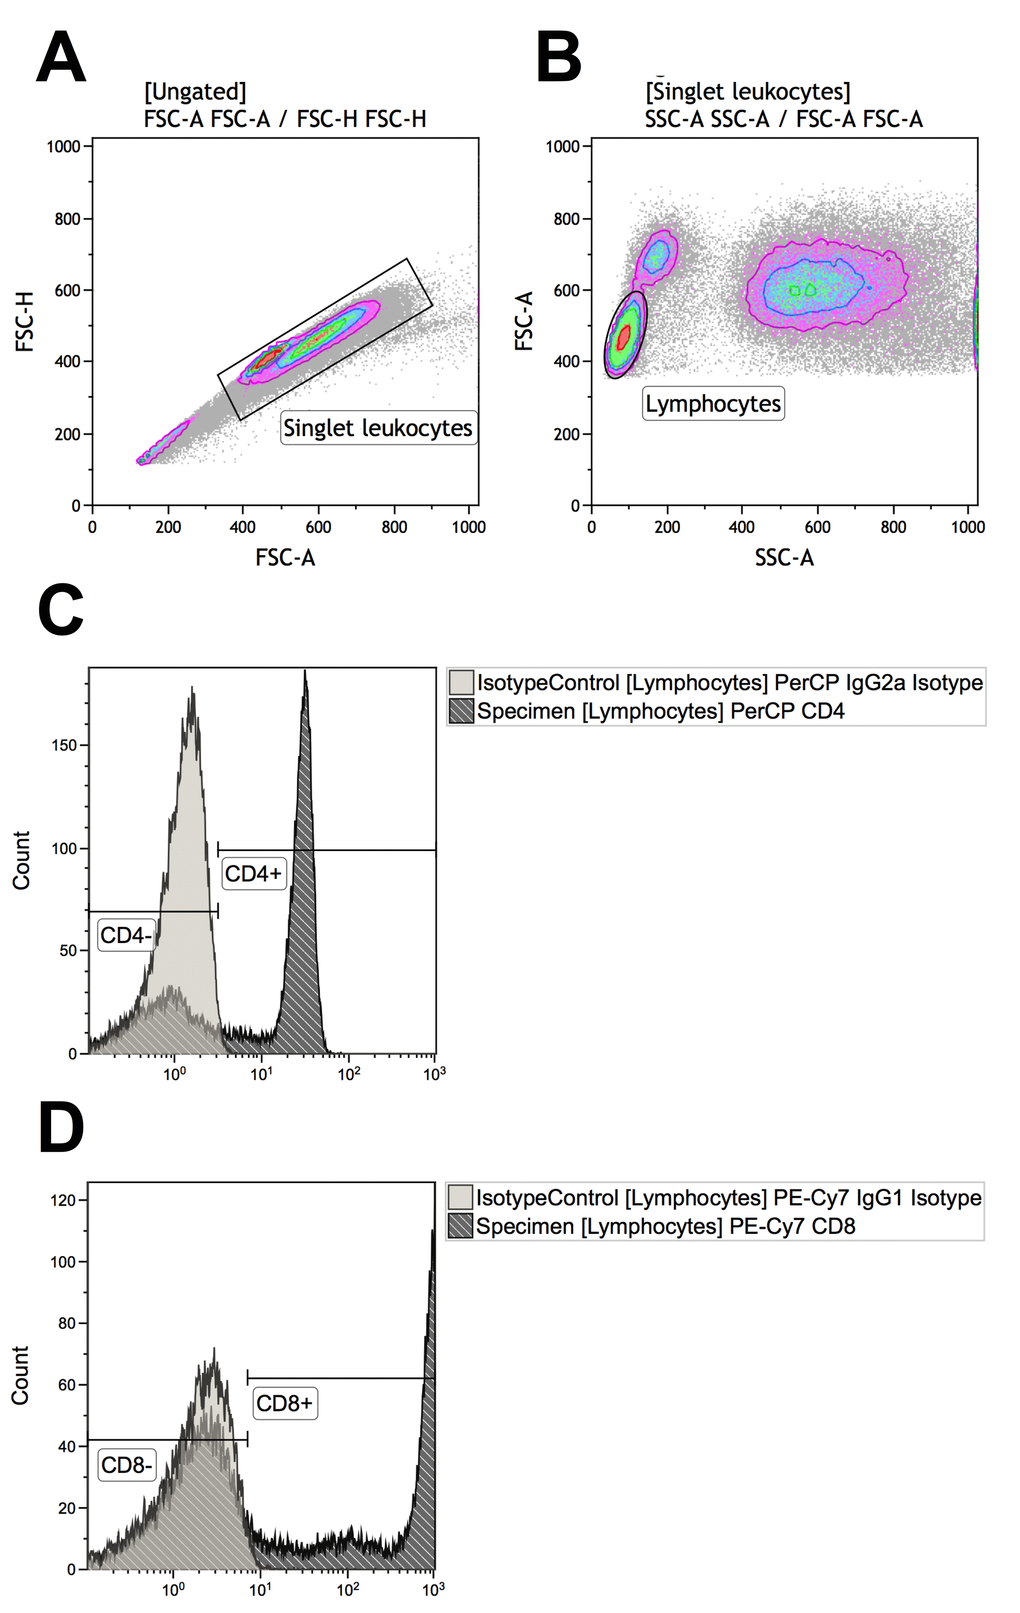 Gating strategies for identifying T-cells that are CD4+ (defined as CD4+CD8-) or CD8+ (defined as CD4-CD8+). (A) Singlet leukocytes were identified using forward scatter height vs. area scatter on a combined contour and density plot. (B) Lymphocytes were identified using forward scatter area vs. side scatter area on a combined contour and density plot. (C) CD4+ and CD4- lymphocytes were identified with the help of negative isotype controls (set at 1% to distinguish fluorescence signal from non-specific background signals). (D) CD4+ and CD4- lymphocytes were identified with the help of negative isotype controls (set at 1% to distinguish fluorescence signal from non-specific background signals). Using logical Boolean sequences, we distinguished two T-cell populations for further analyses: CD4+ T-cells that were CD4+CD8- and CD8+ T-cells that were CD4-CD8+.